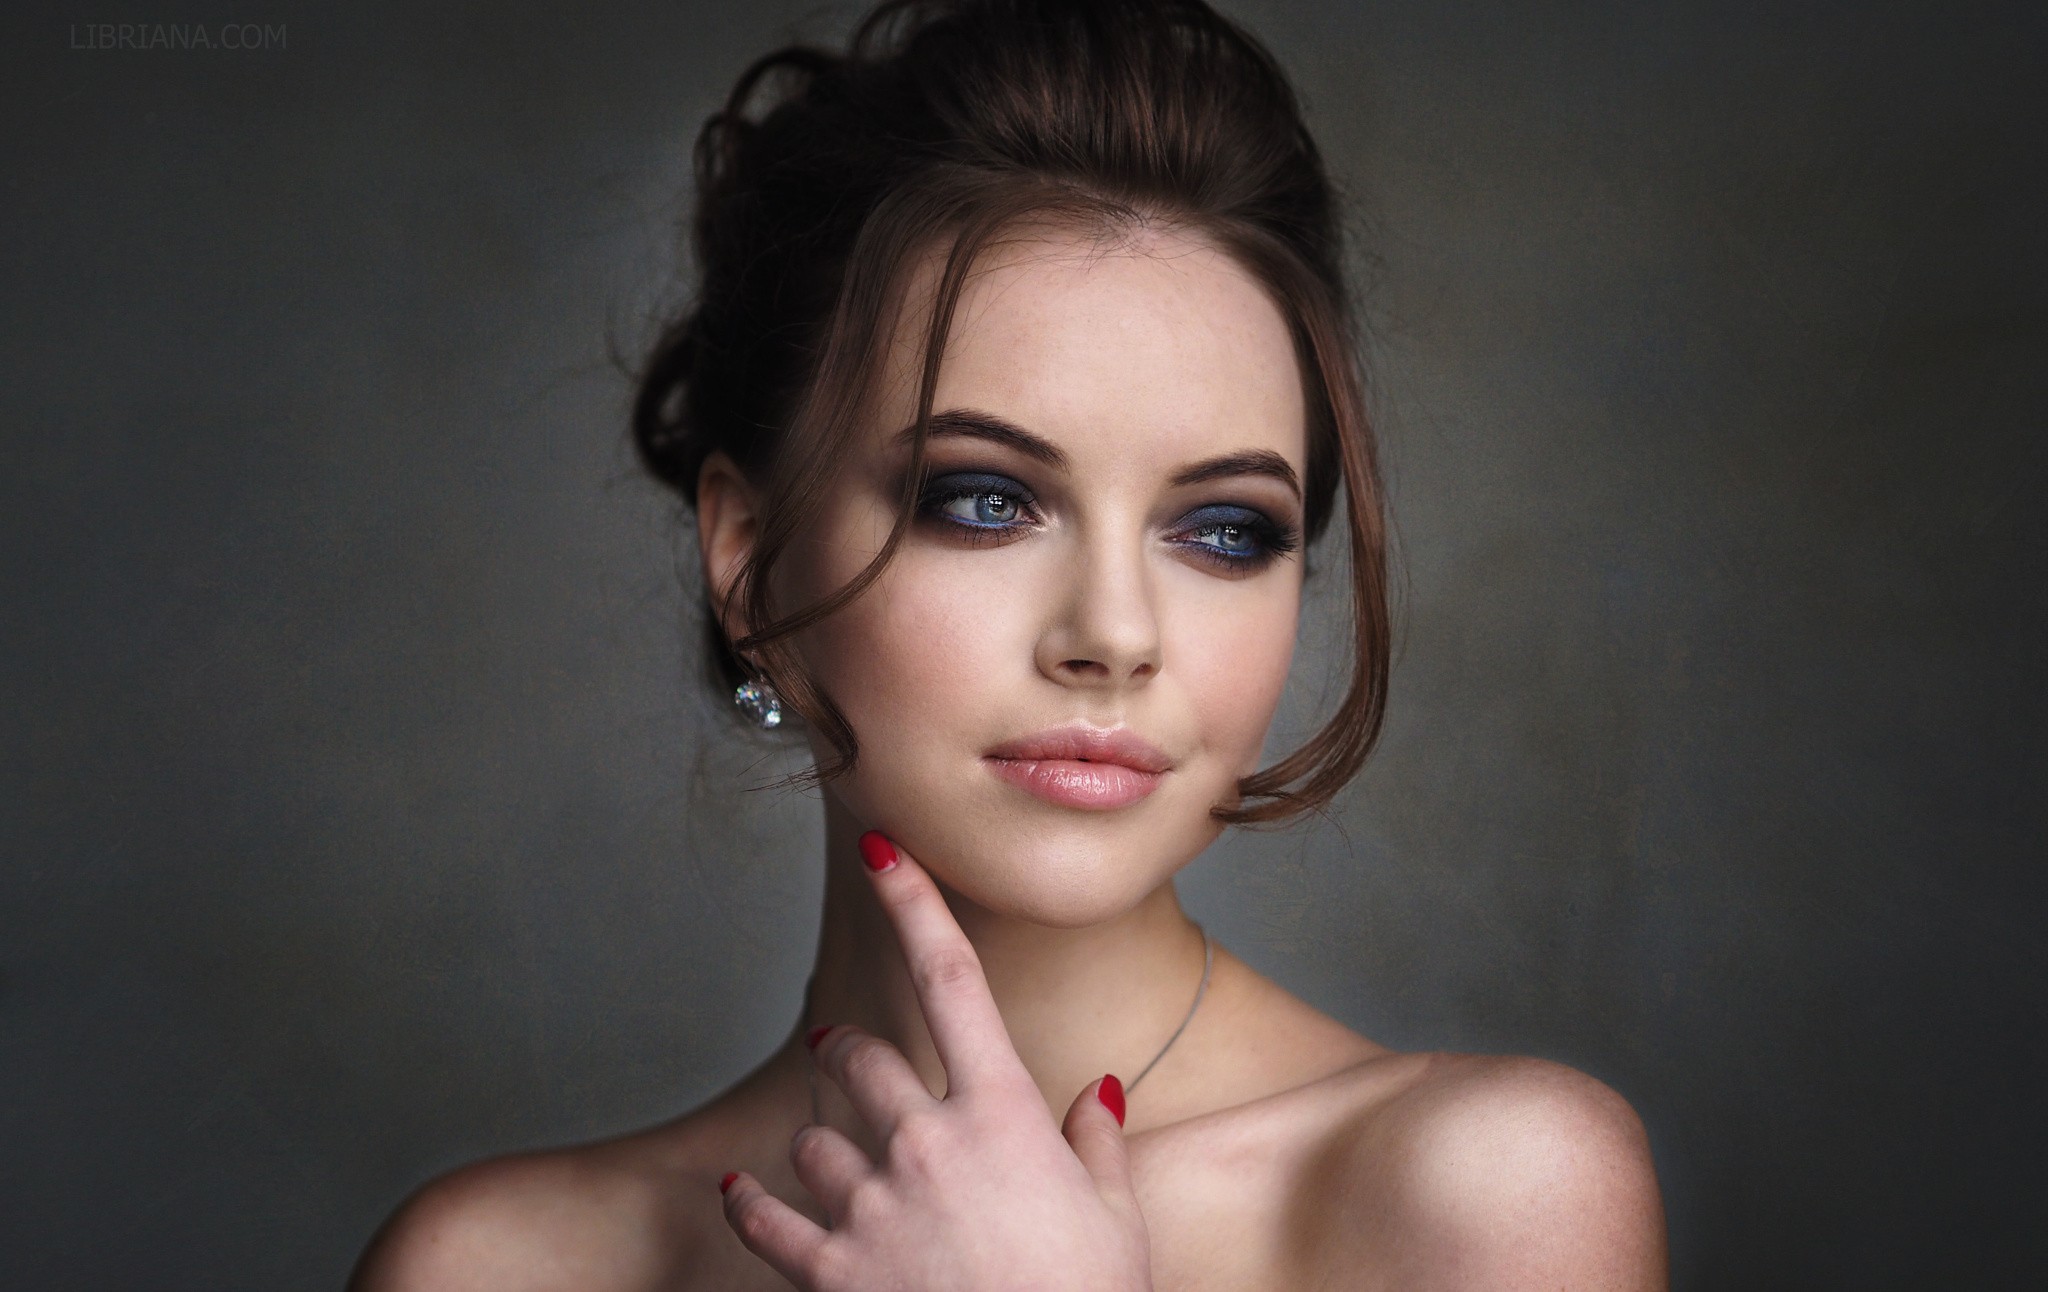 People 2048x1292 women looking away face portrait painted nails simple background Polina Bodrova Libriana women indoors indoors model makeup red nails brunette eyeliner fingers studio closeup watermarked